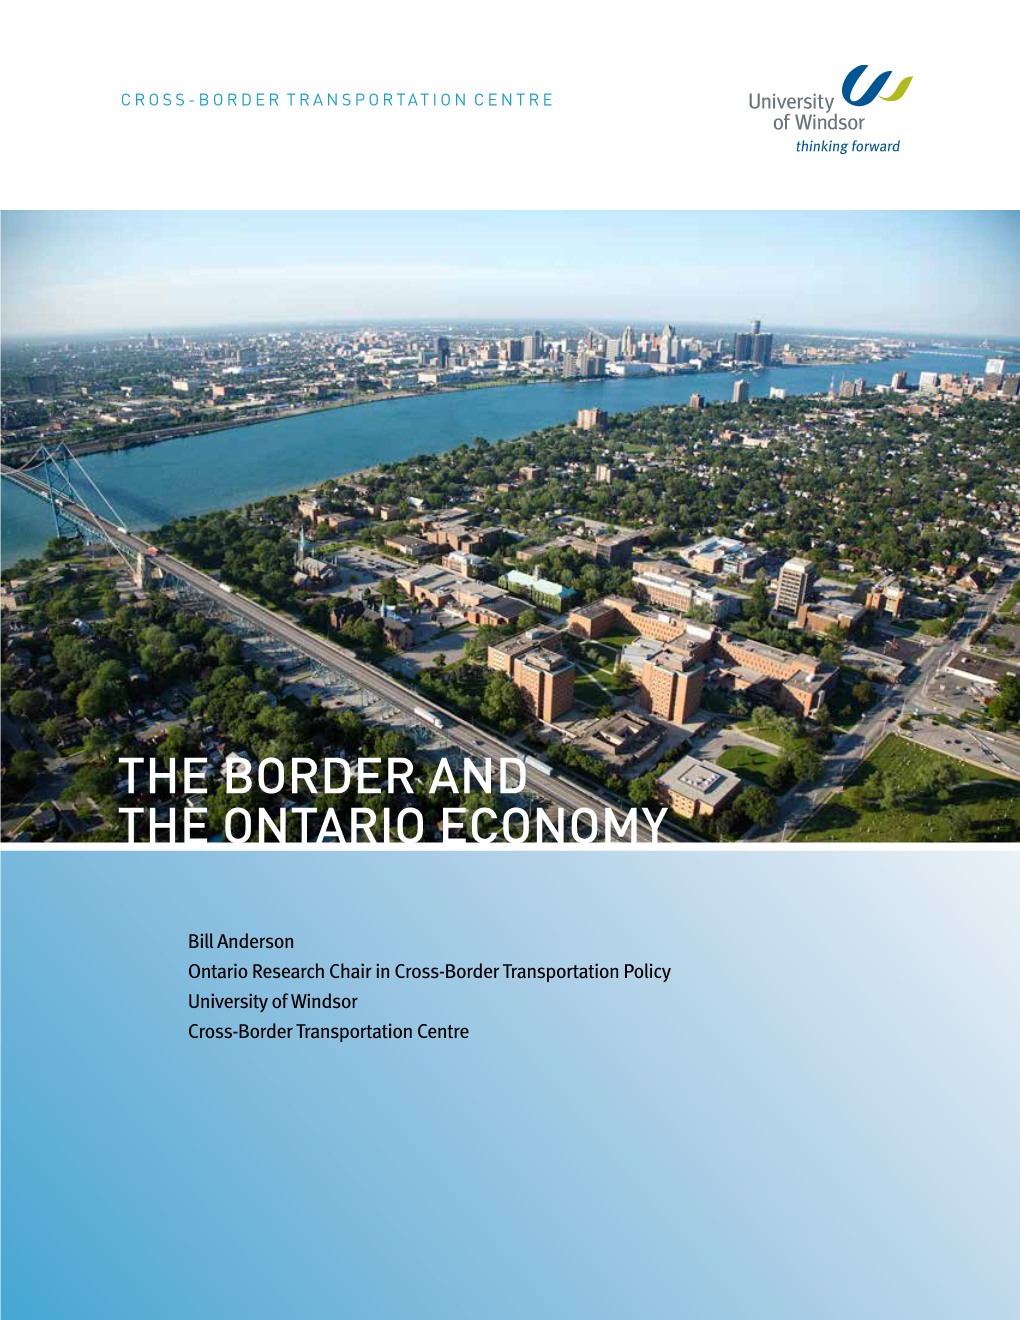 The Border and the Ontario Economy